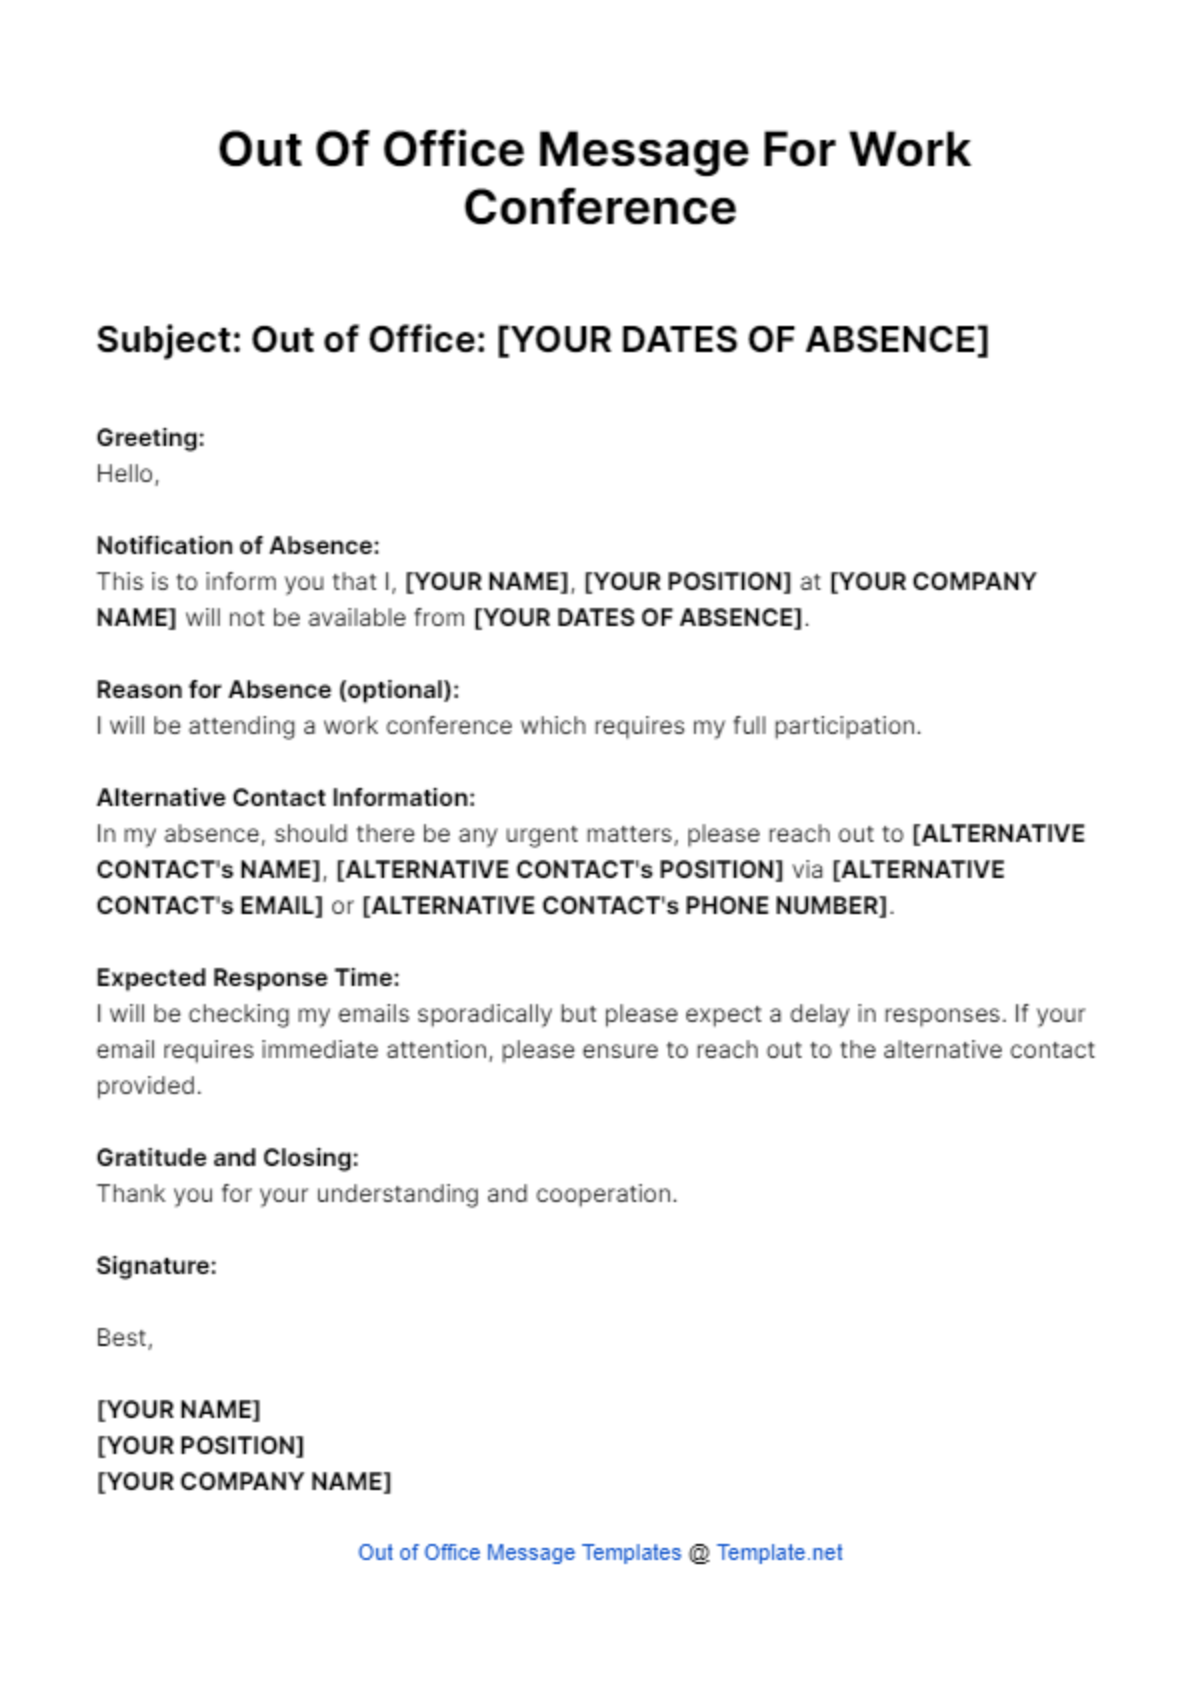 Free Out Of Office Message For Work Conference Template